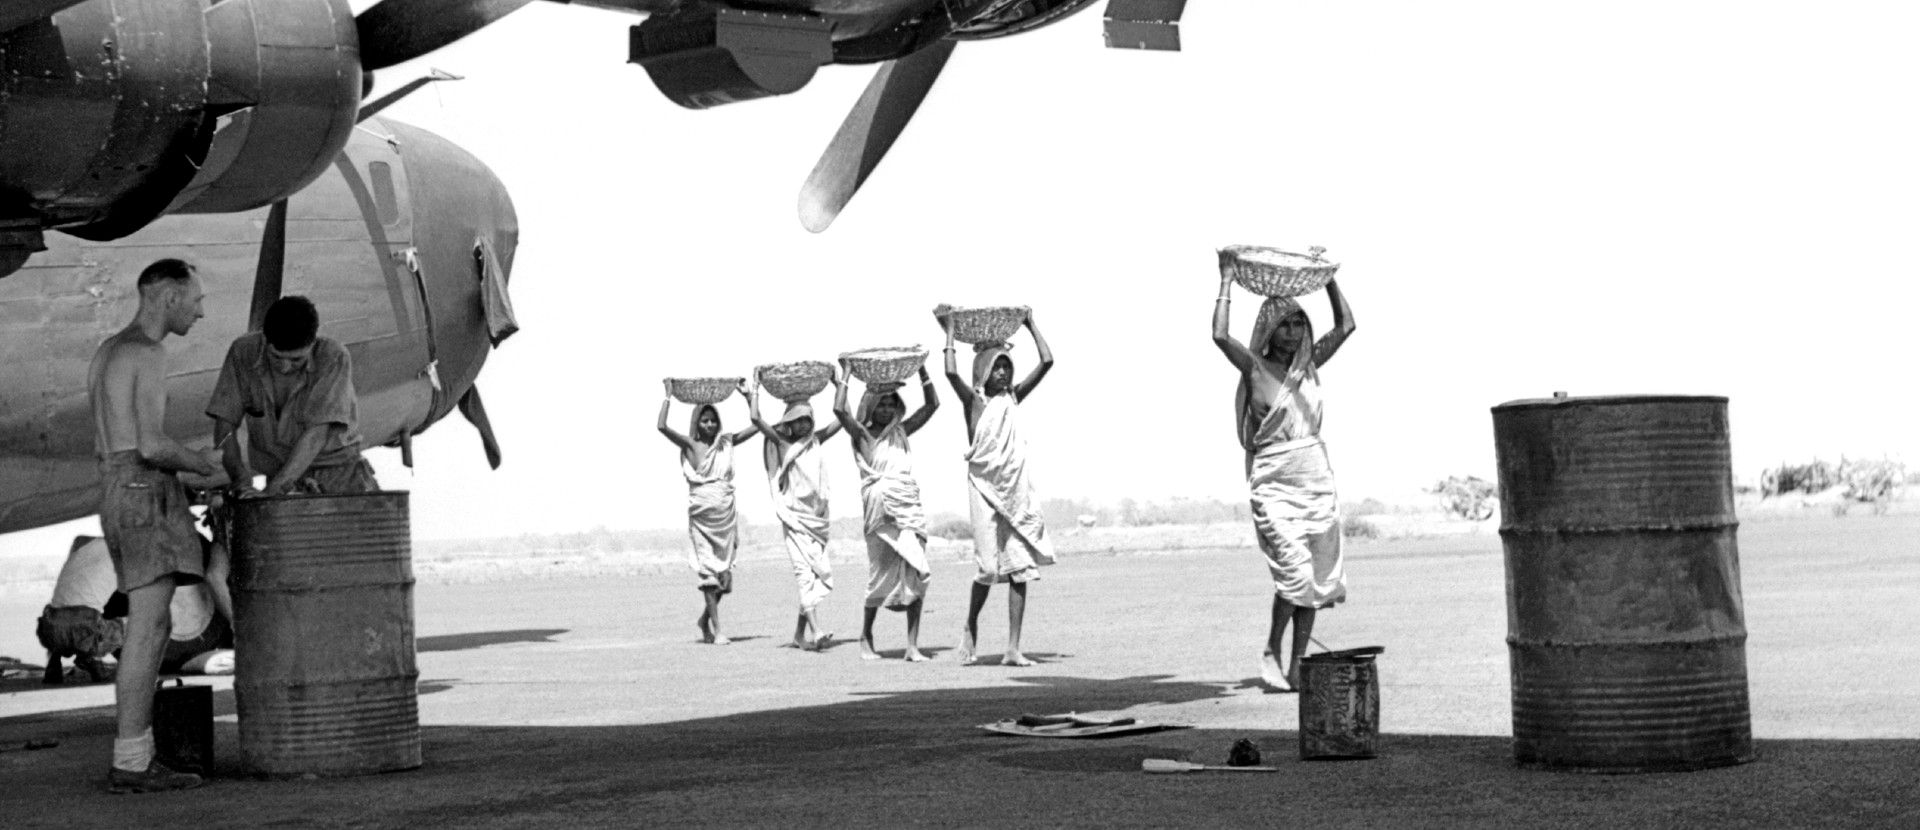 A group of women wearing saris walking along the tarmac of an airplane runway carrying goods on their heads